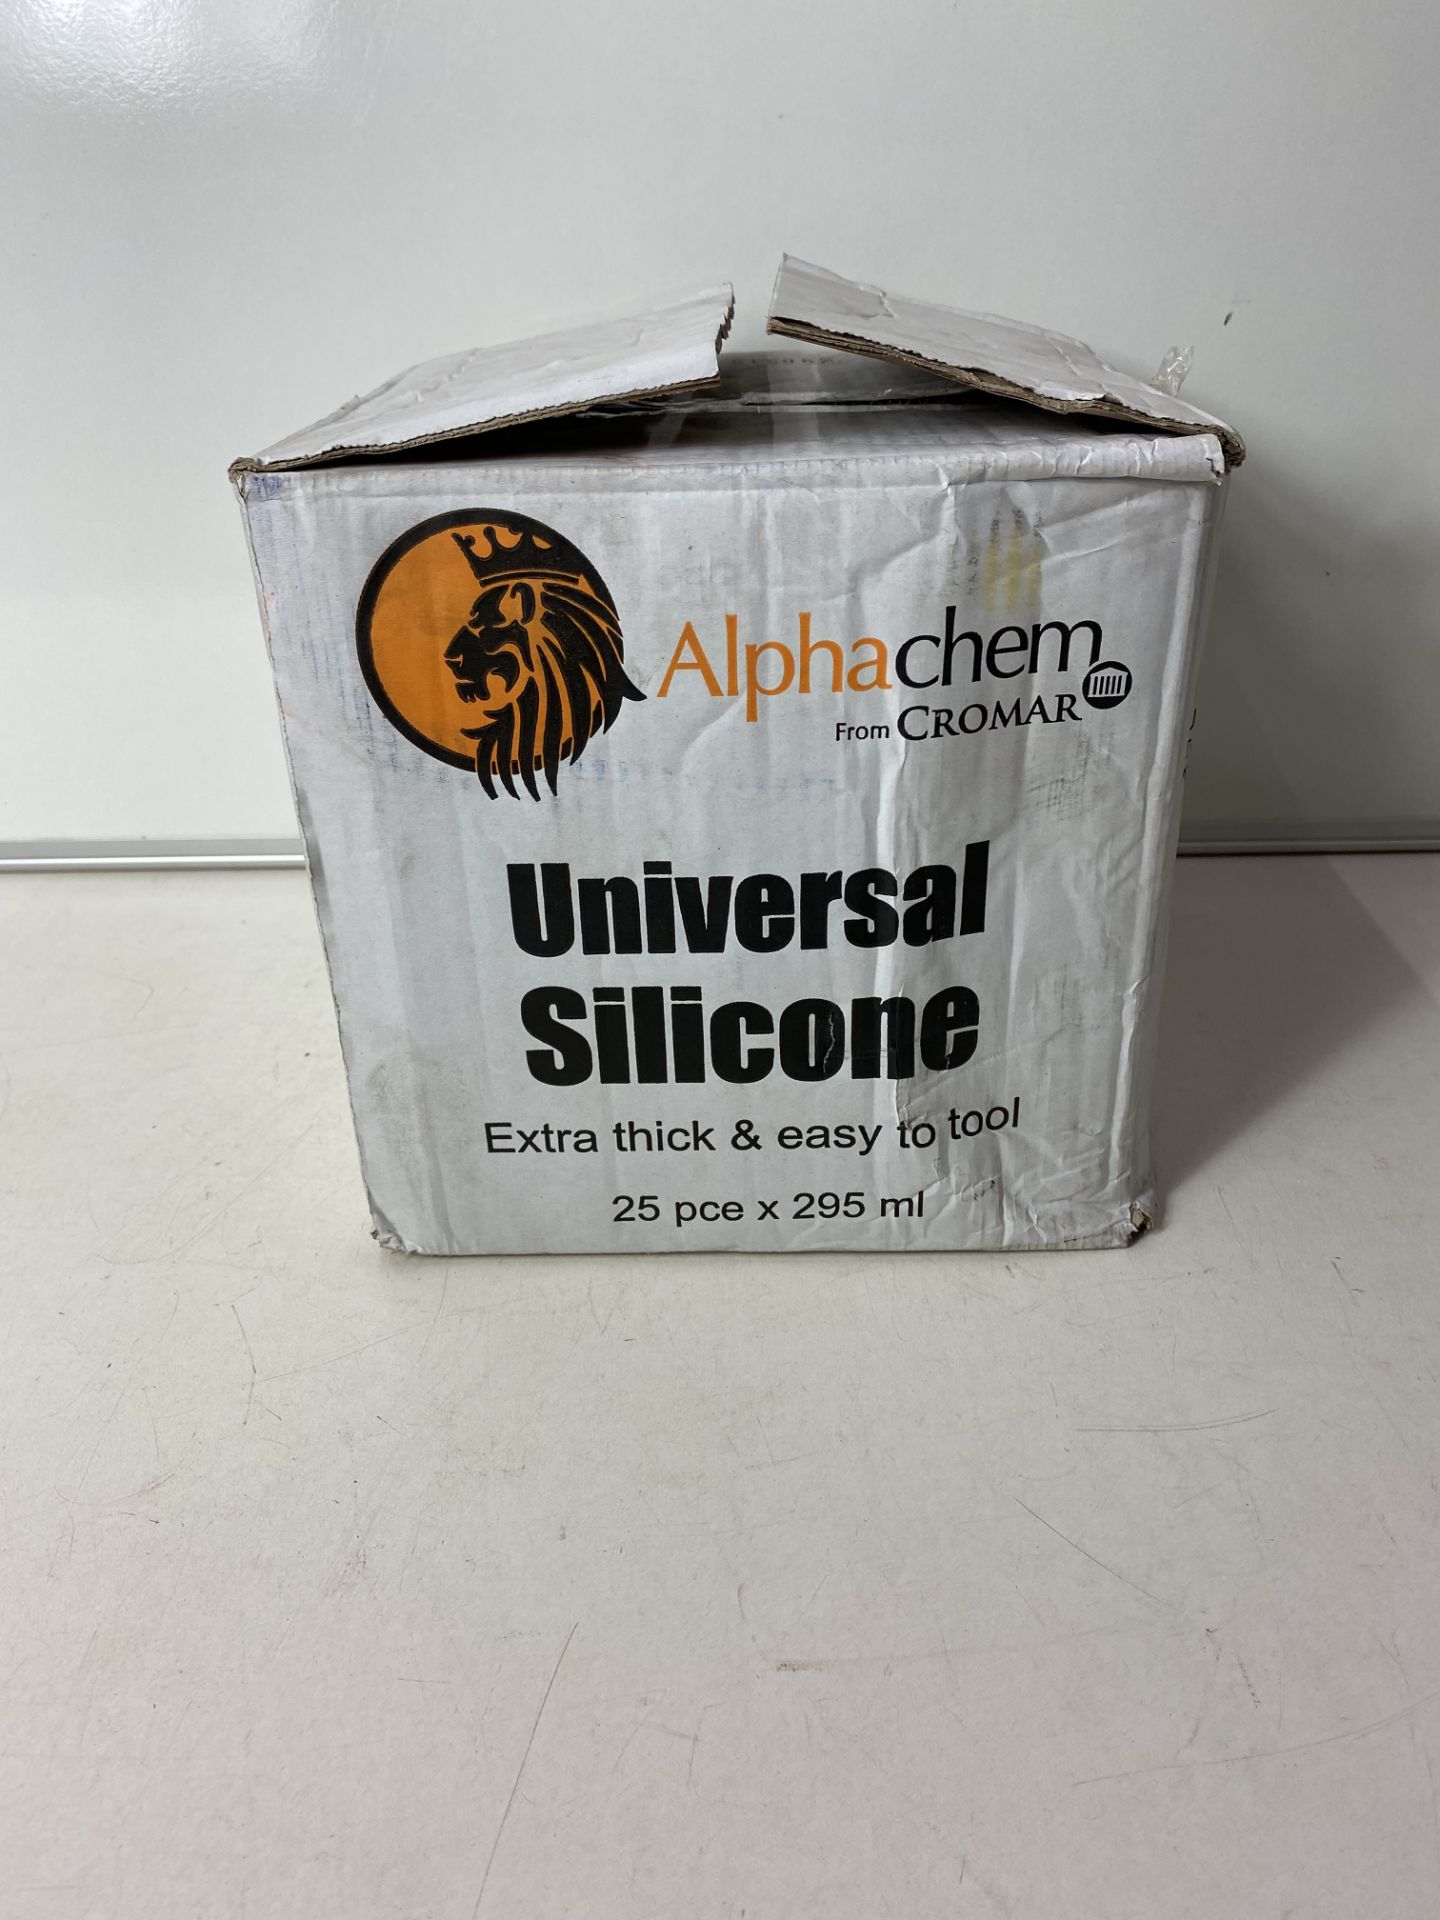 25 x Cromar Alpha Chem Clear Universal Silicone - Image 3 of 3